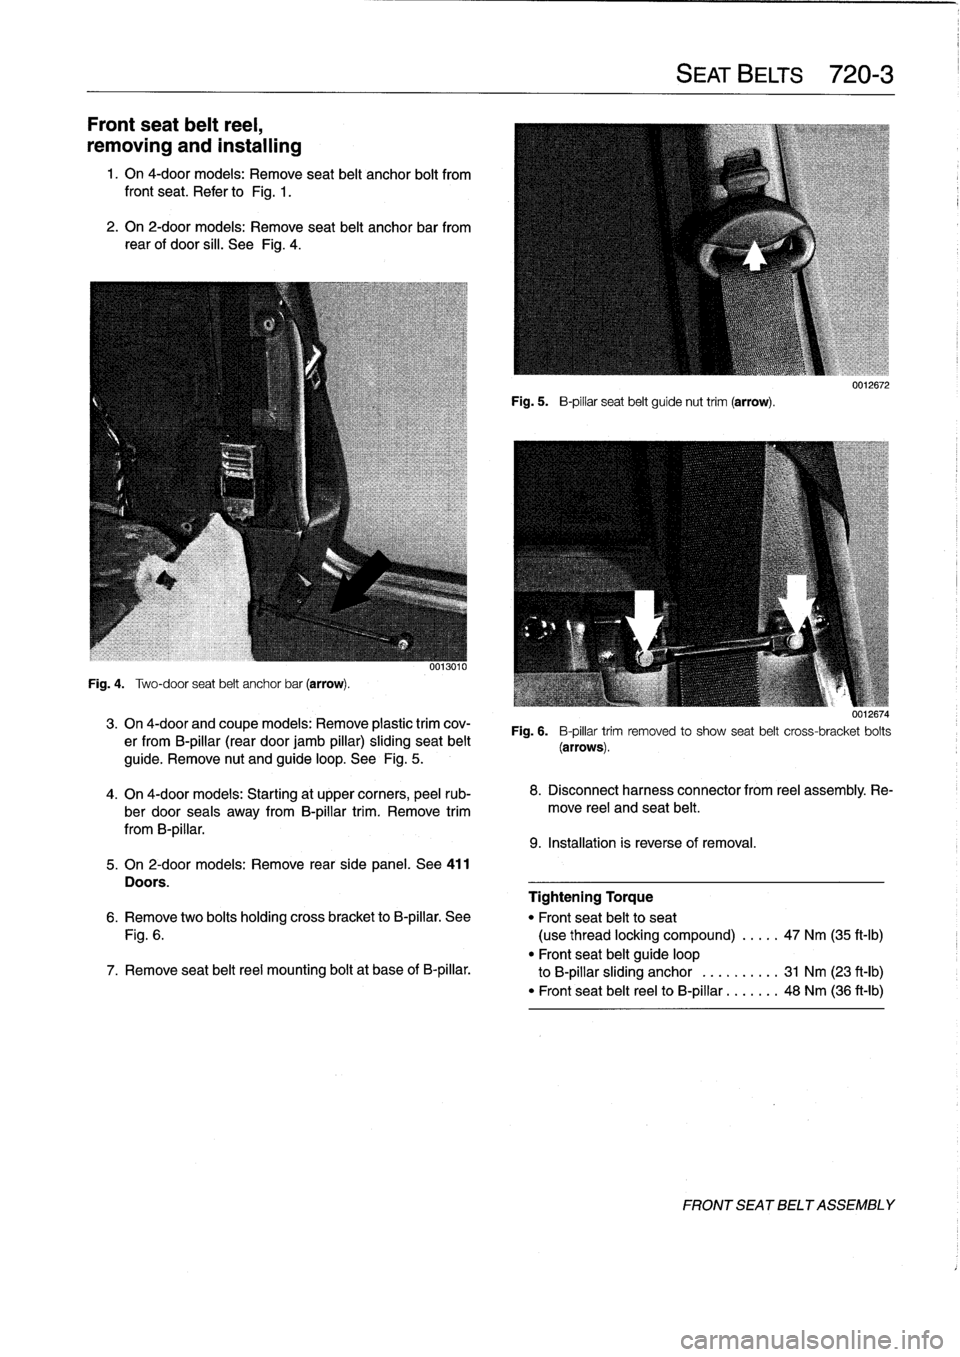 BMW M3 1993 E36 Repair Manual 
Front
seat
belt
reel,

removing
and
installing

1
.
On
4-door
models
:
Remove
seat
belt
anchor
bolt
from
front
seat
.
Refer
to
Fig
.
1
.

2
.
On
2-door
models
:
Remove
seat
belt
anchorbar
from
rear
o